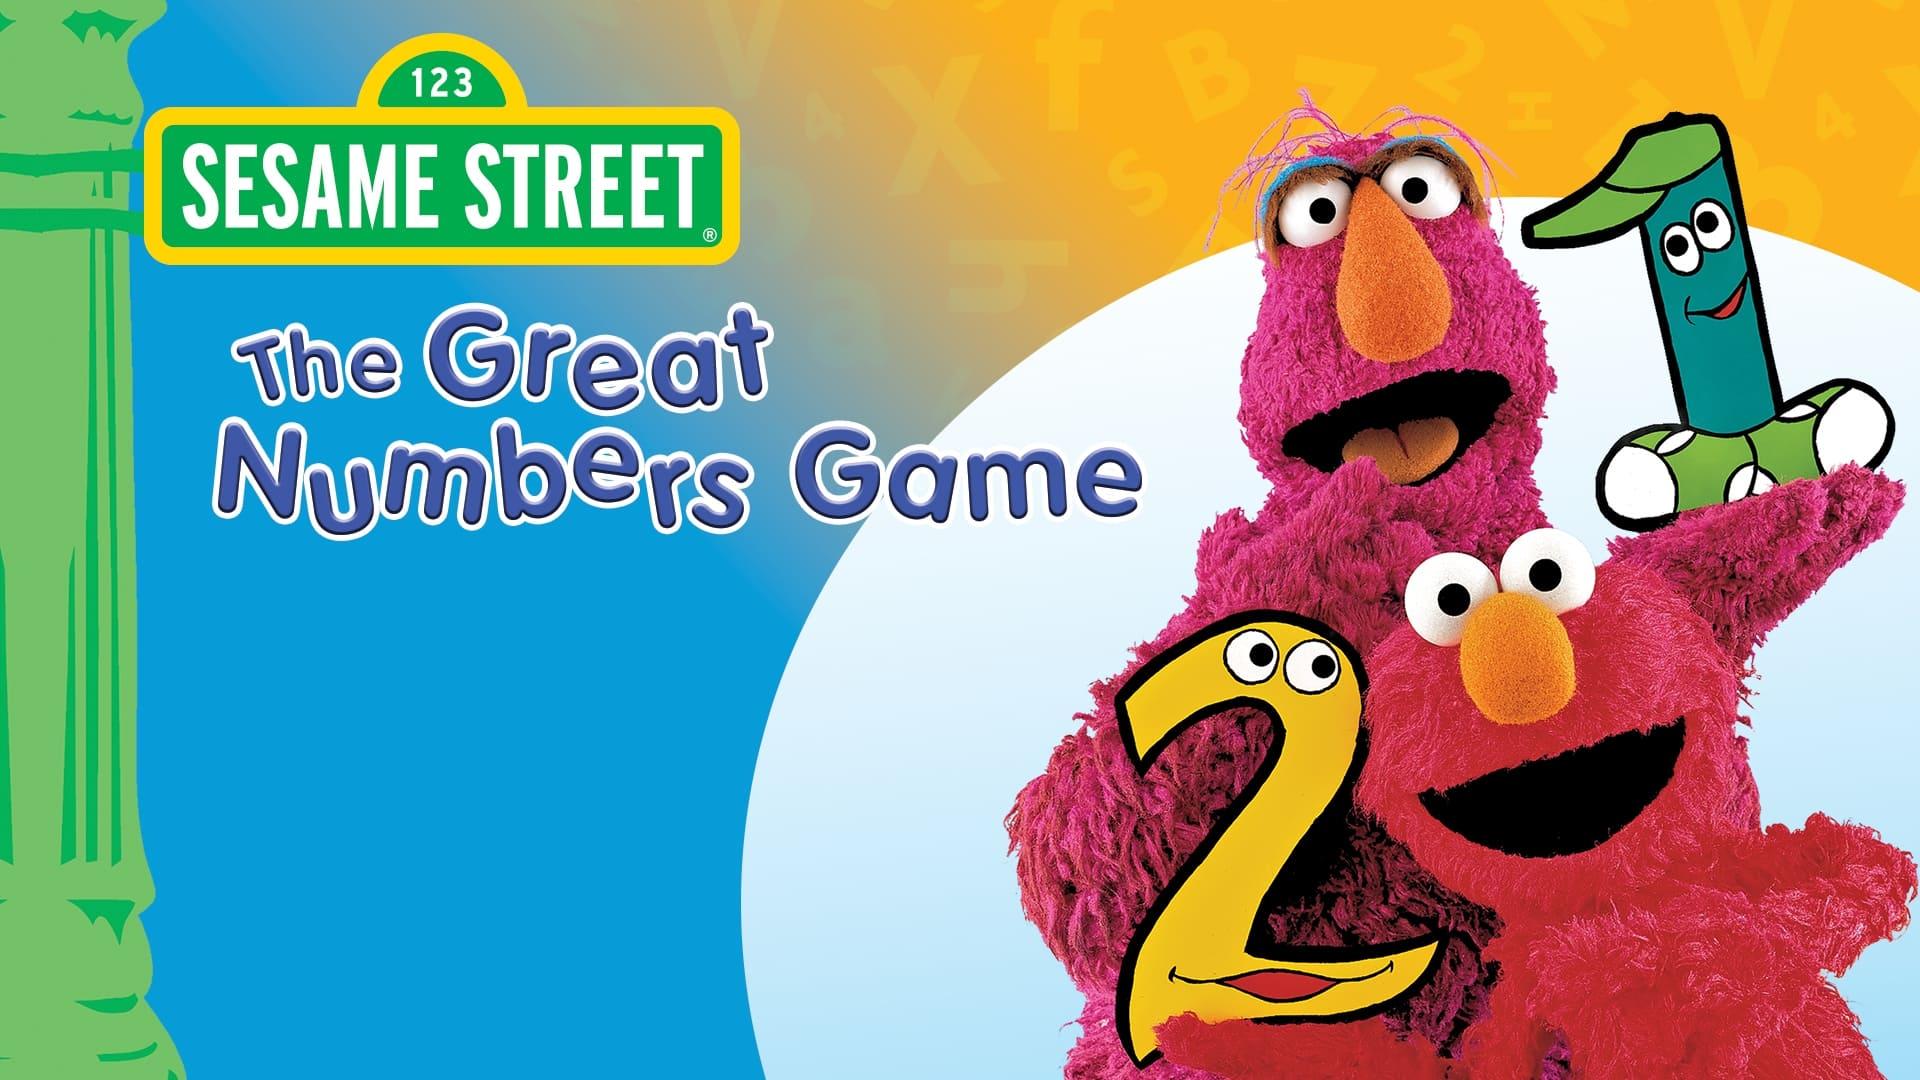 Sesame Street: The Great Numbers Game backdrop